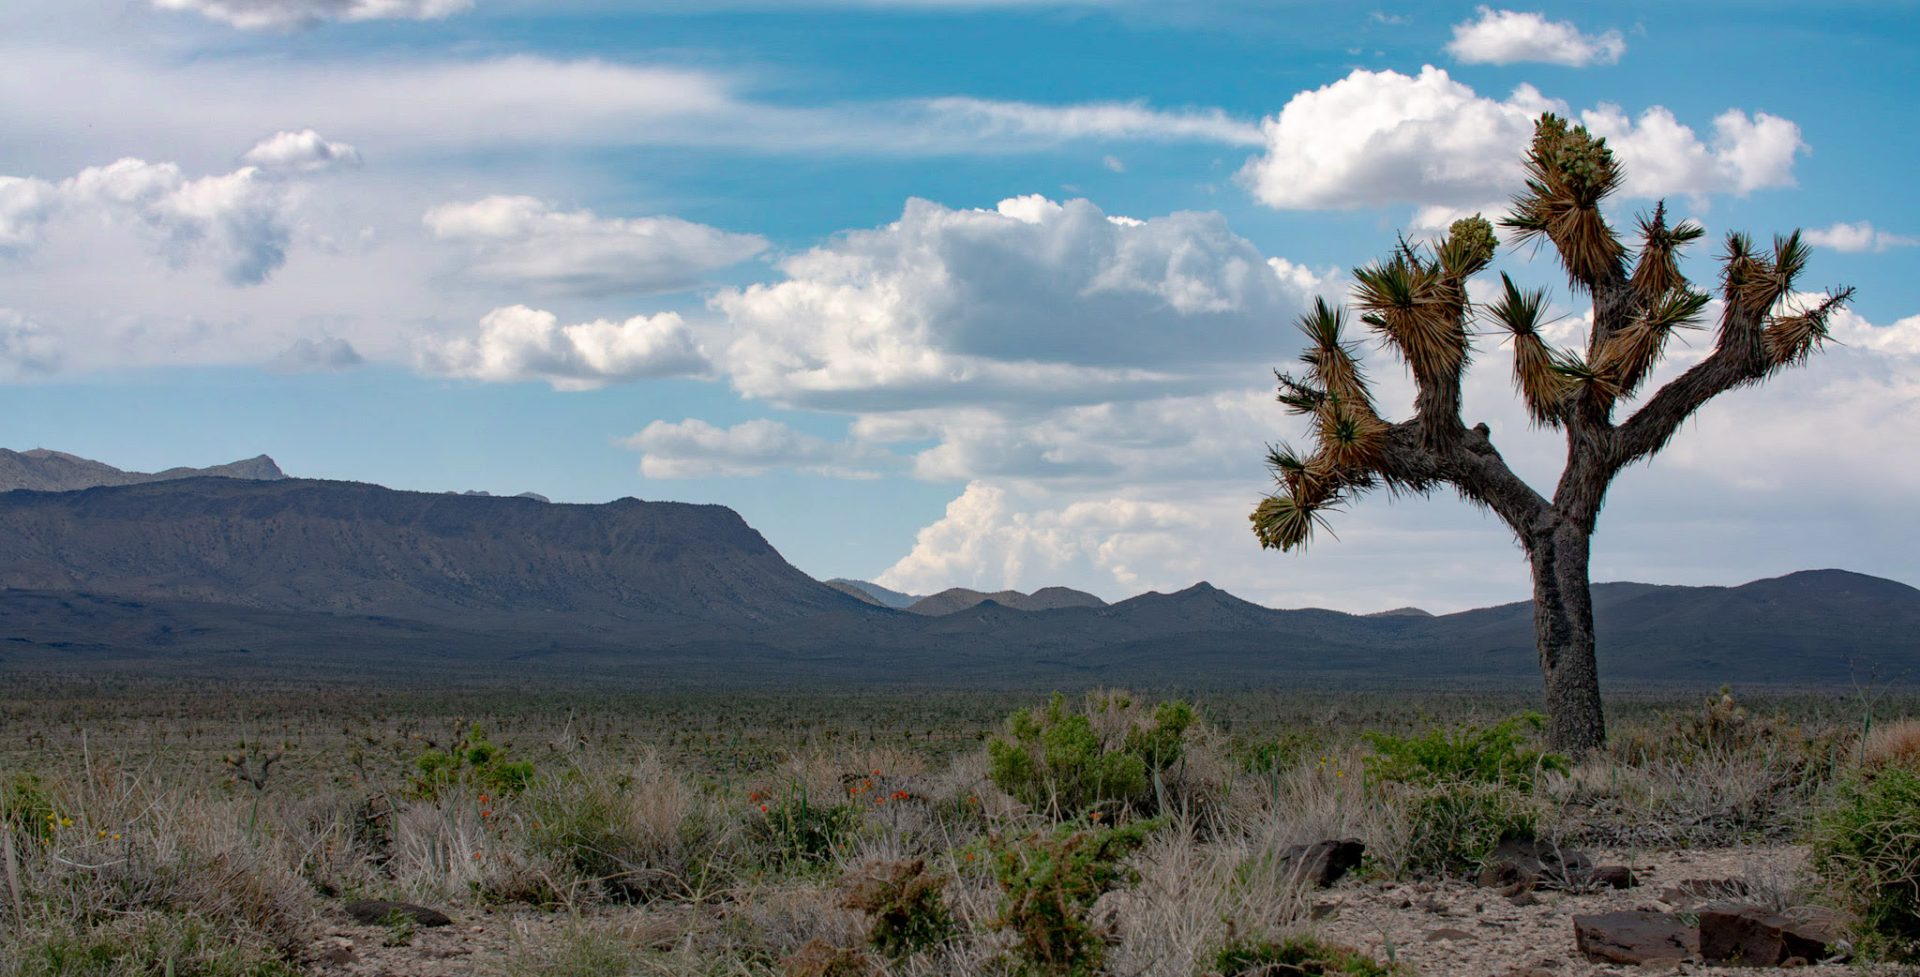 Make Your Voice Heard: Tell the BLM You Do Not Want Drilling On Conglomerate Mesa!